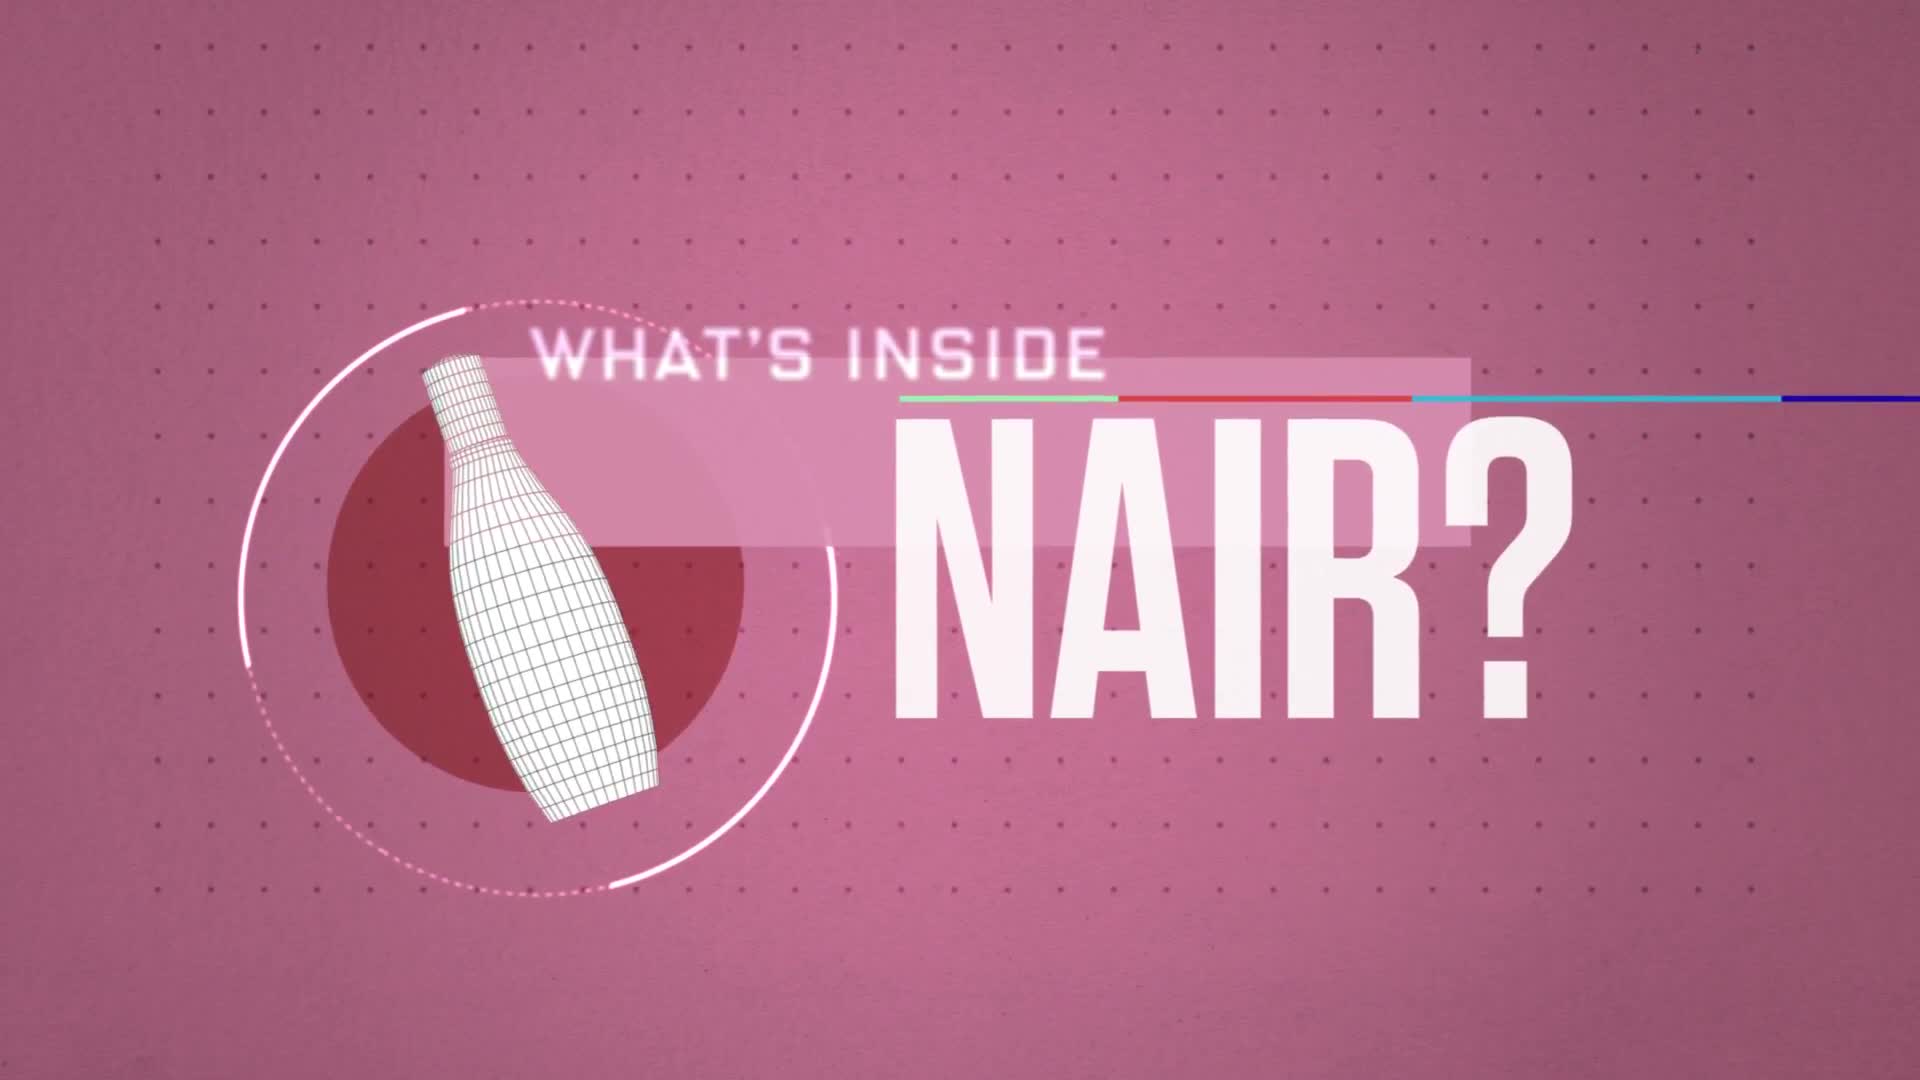 Watch Nair Hair Removal | What's Inside | WIRED